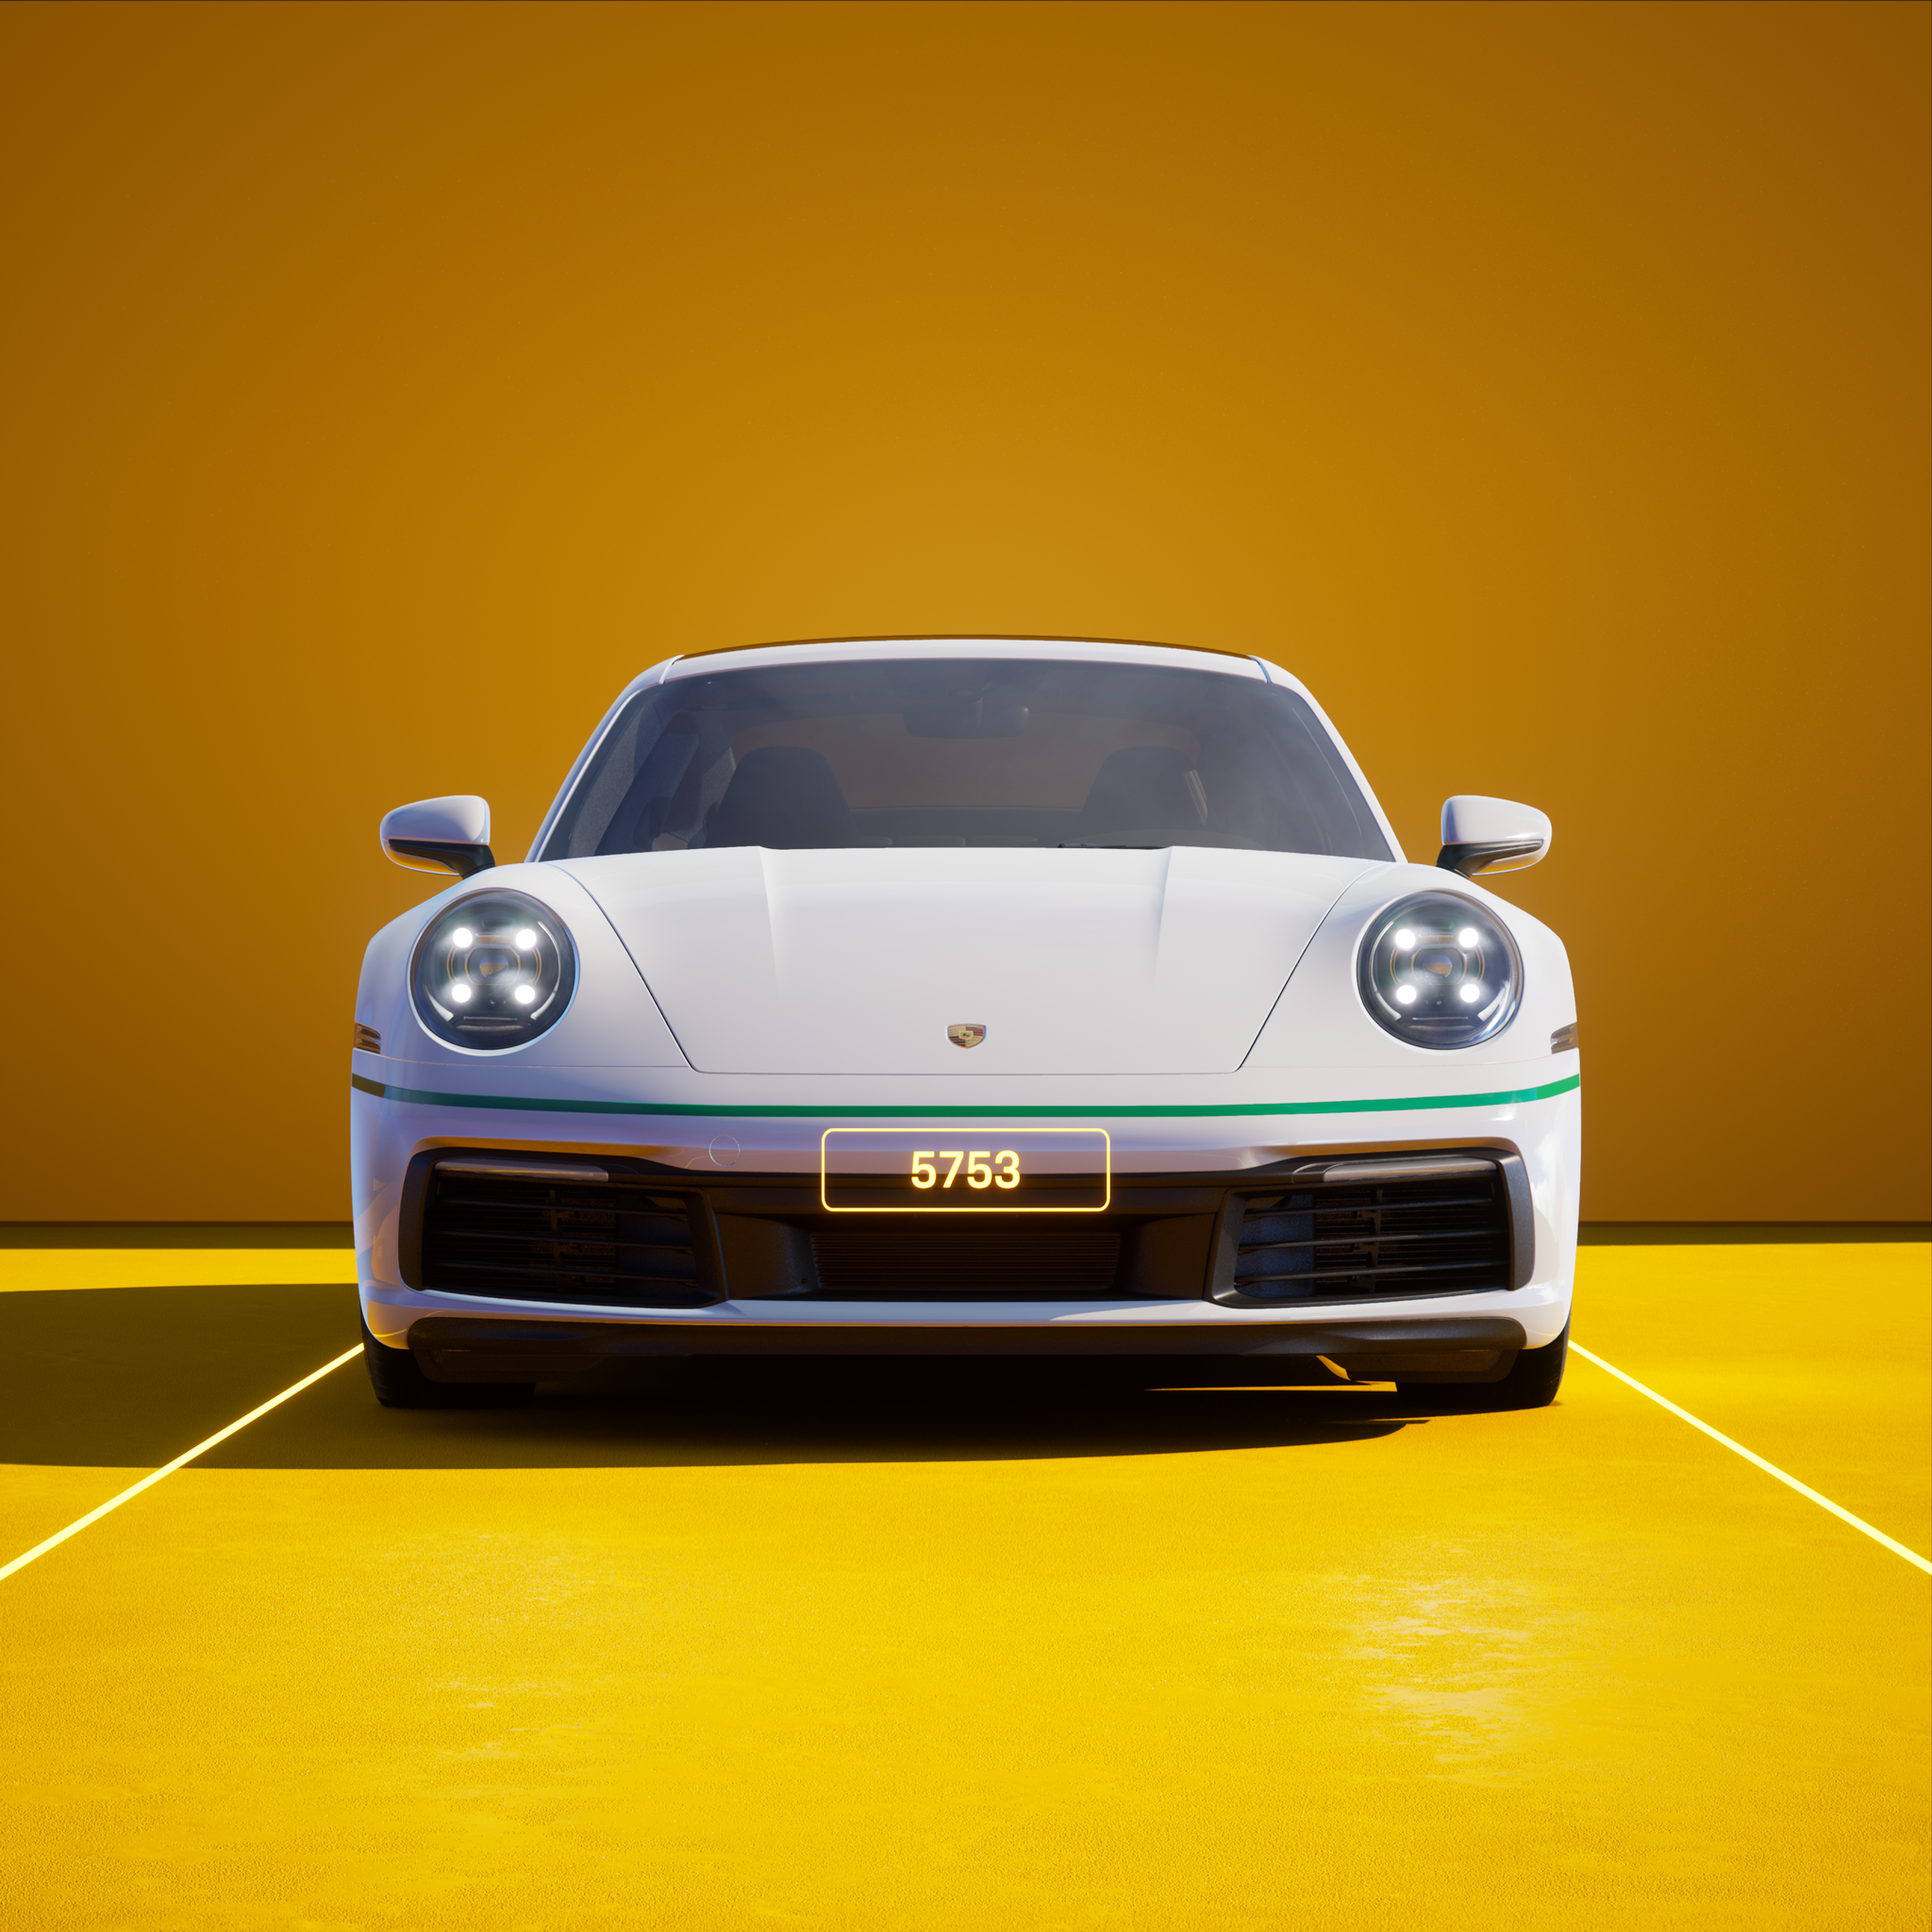 The PORSCHΞ 911 5753 image in phase